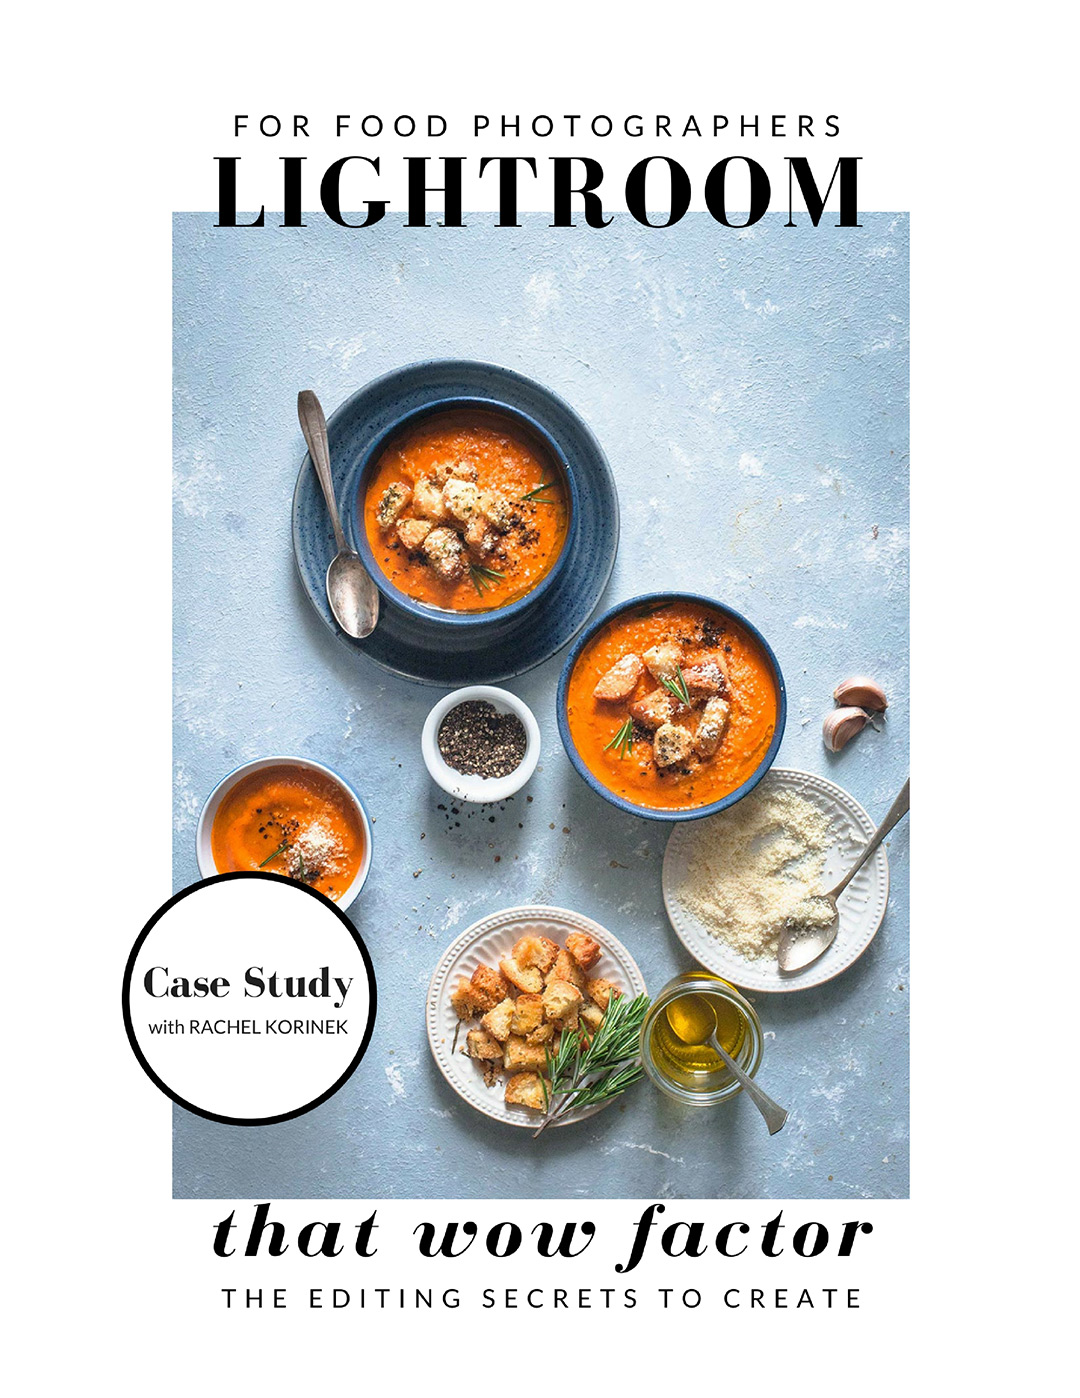 Lightroom for Food Photographers. How it will give you to confidence to edit for that wow factor you want in your photos.